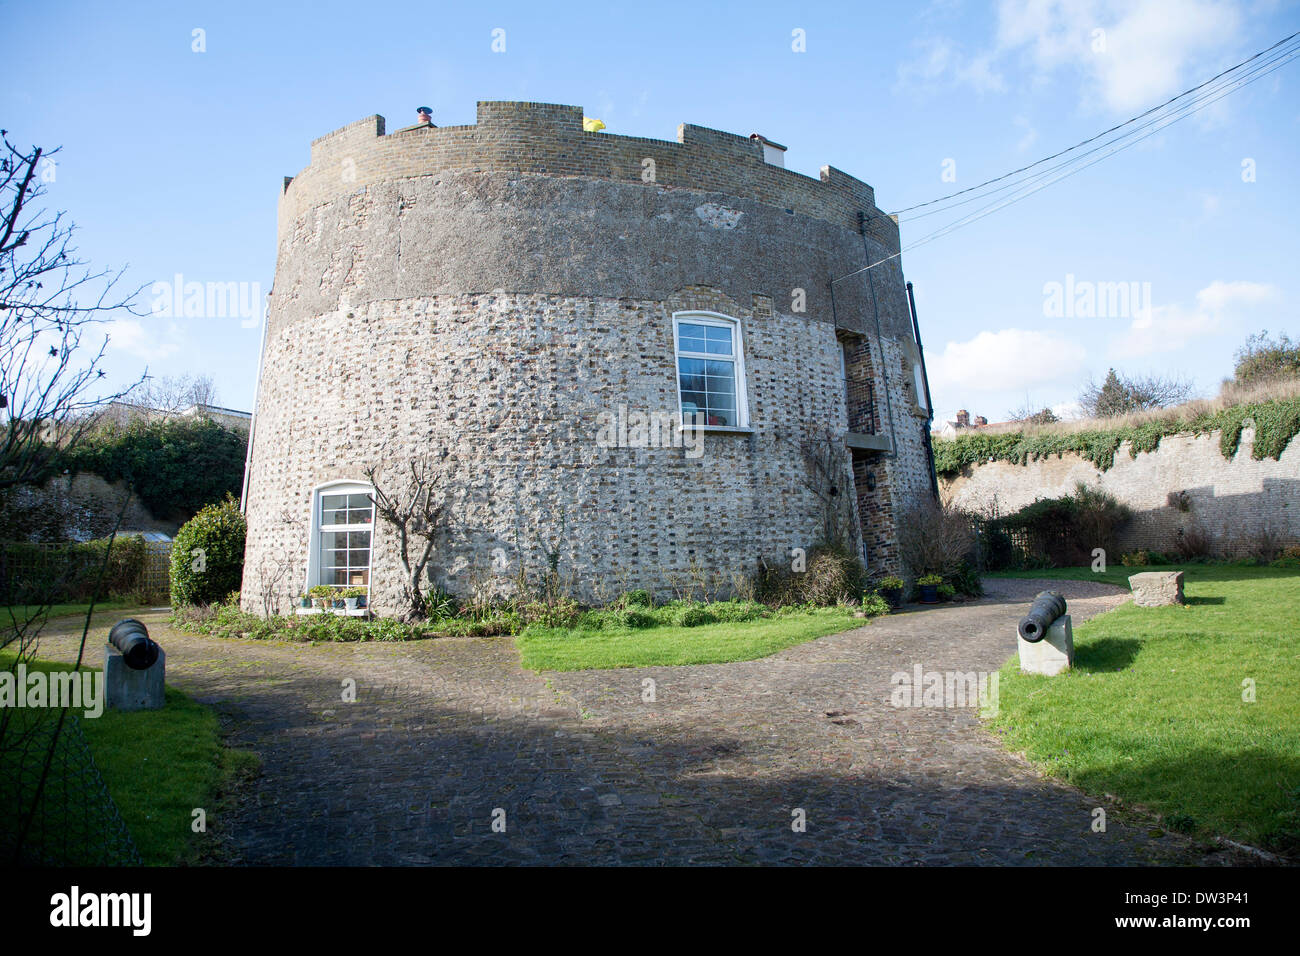 Martello Tower Q dating from the Napoleonic War converted to residential property, Felixstowe, Suffolk, England Stock Photo